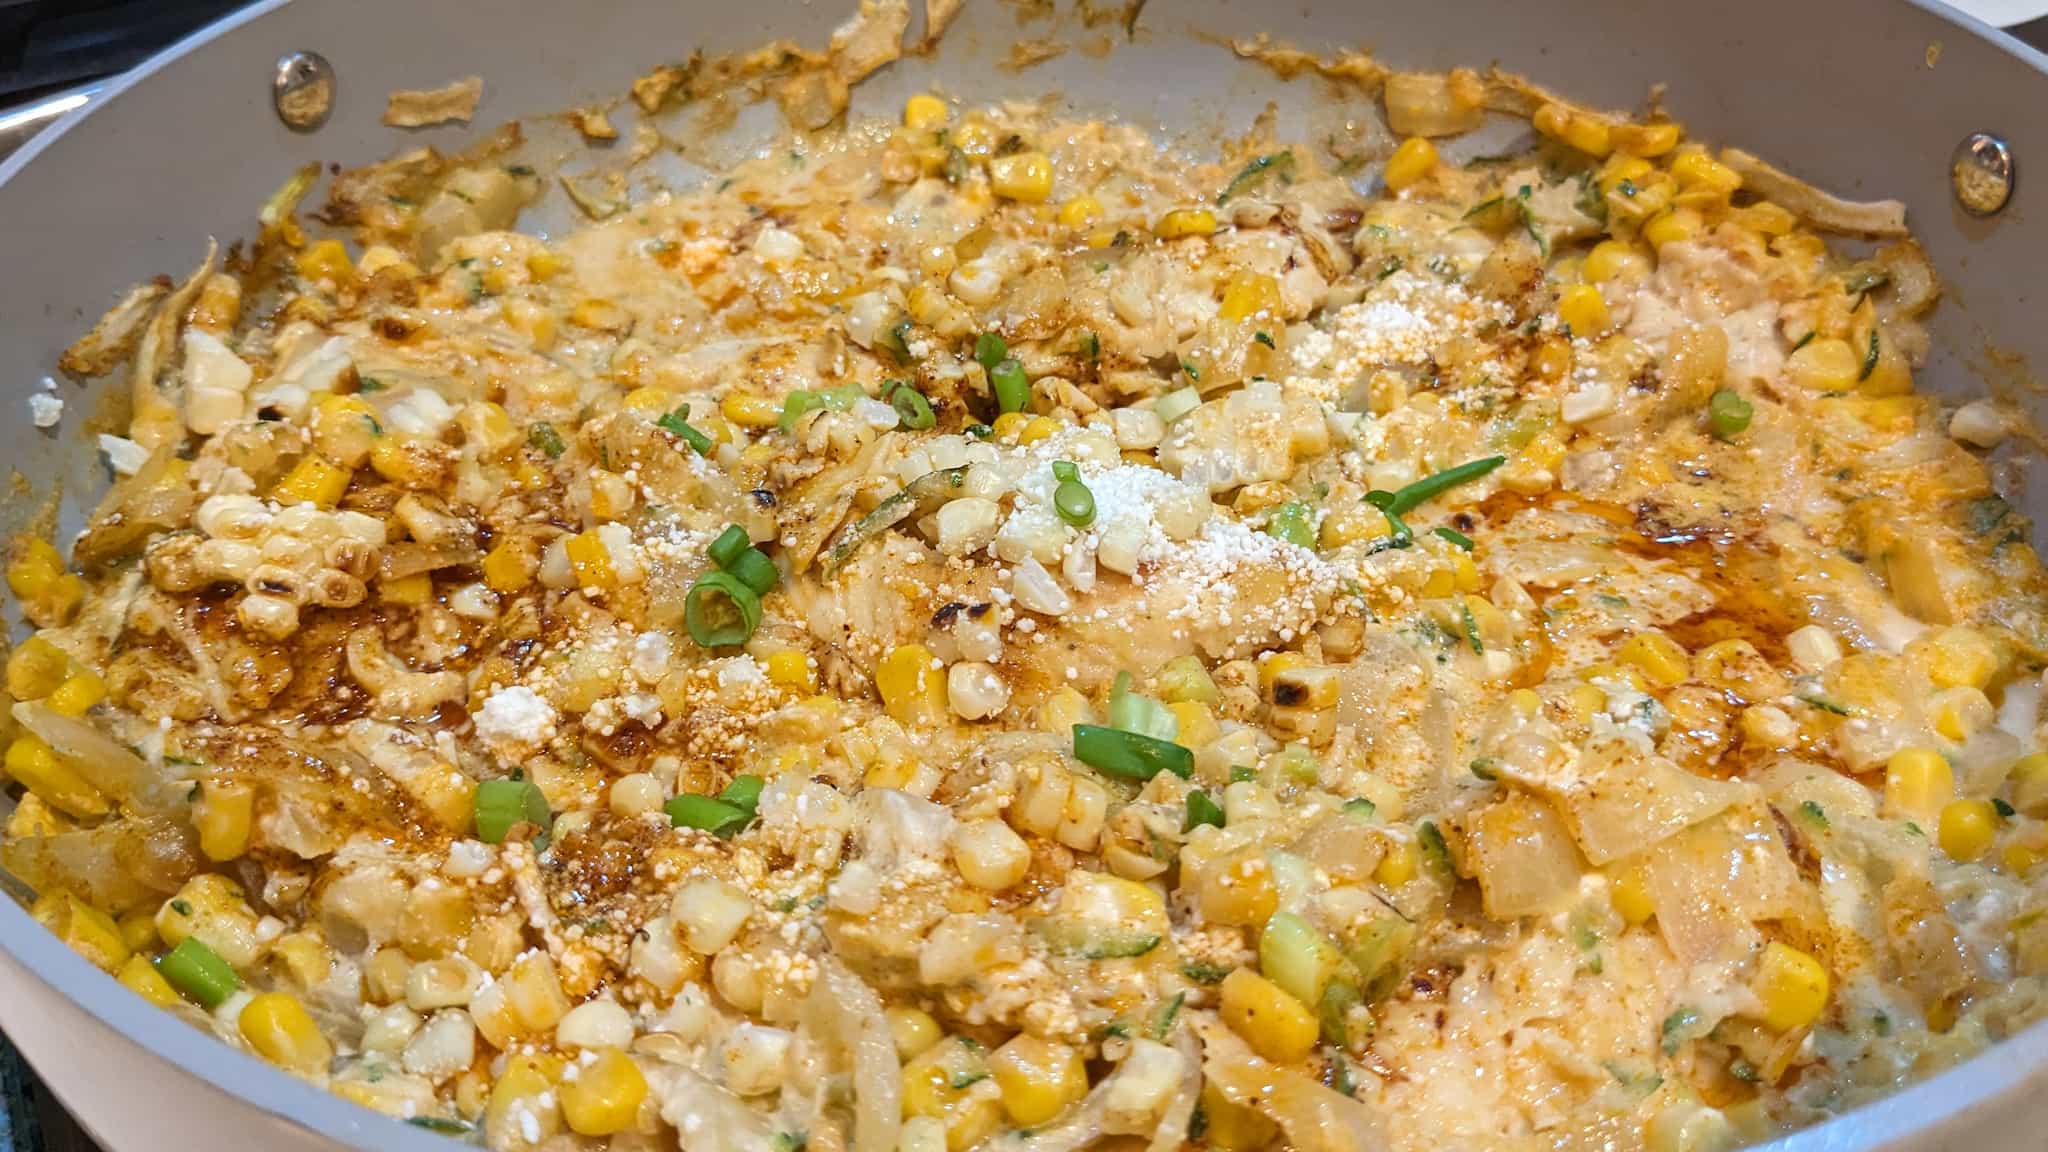 Large skillet with corn, onions, spices, and cheese over barely visible chicken tenders.